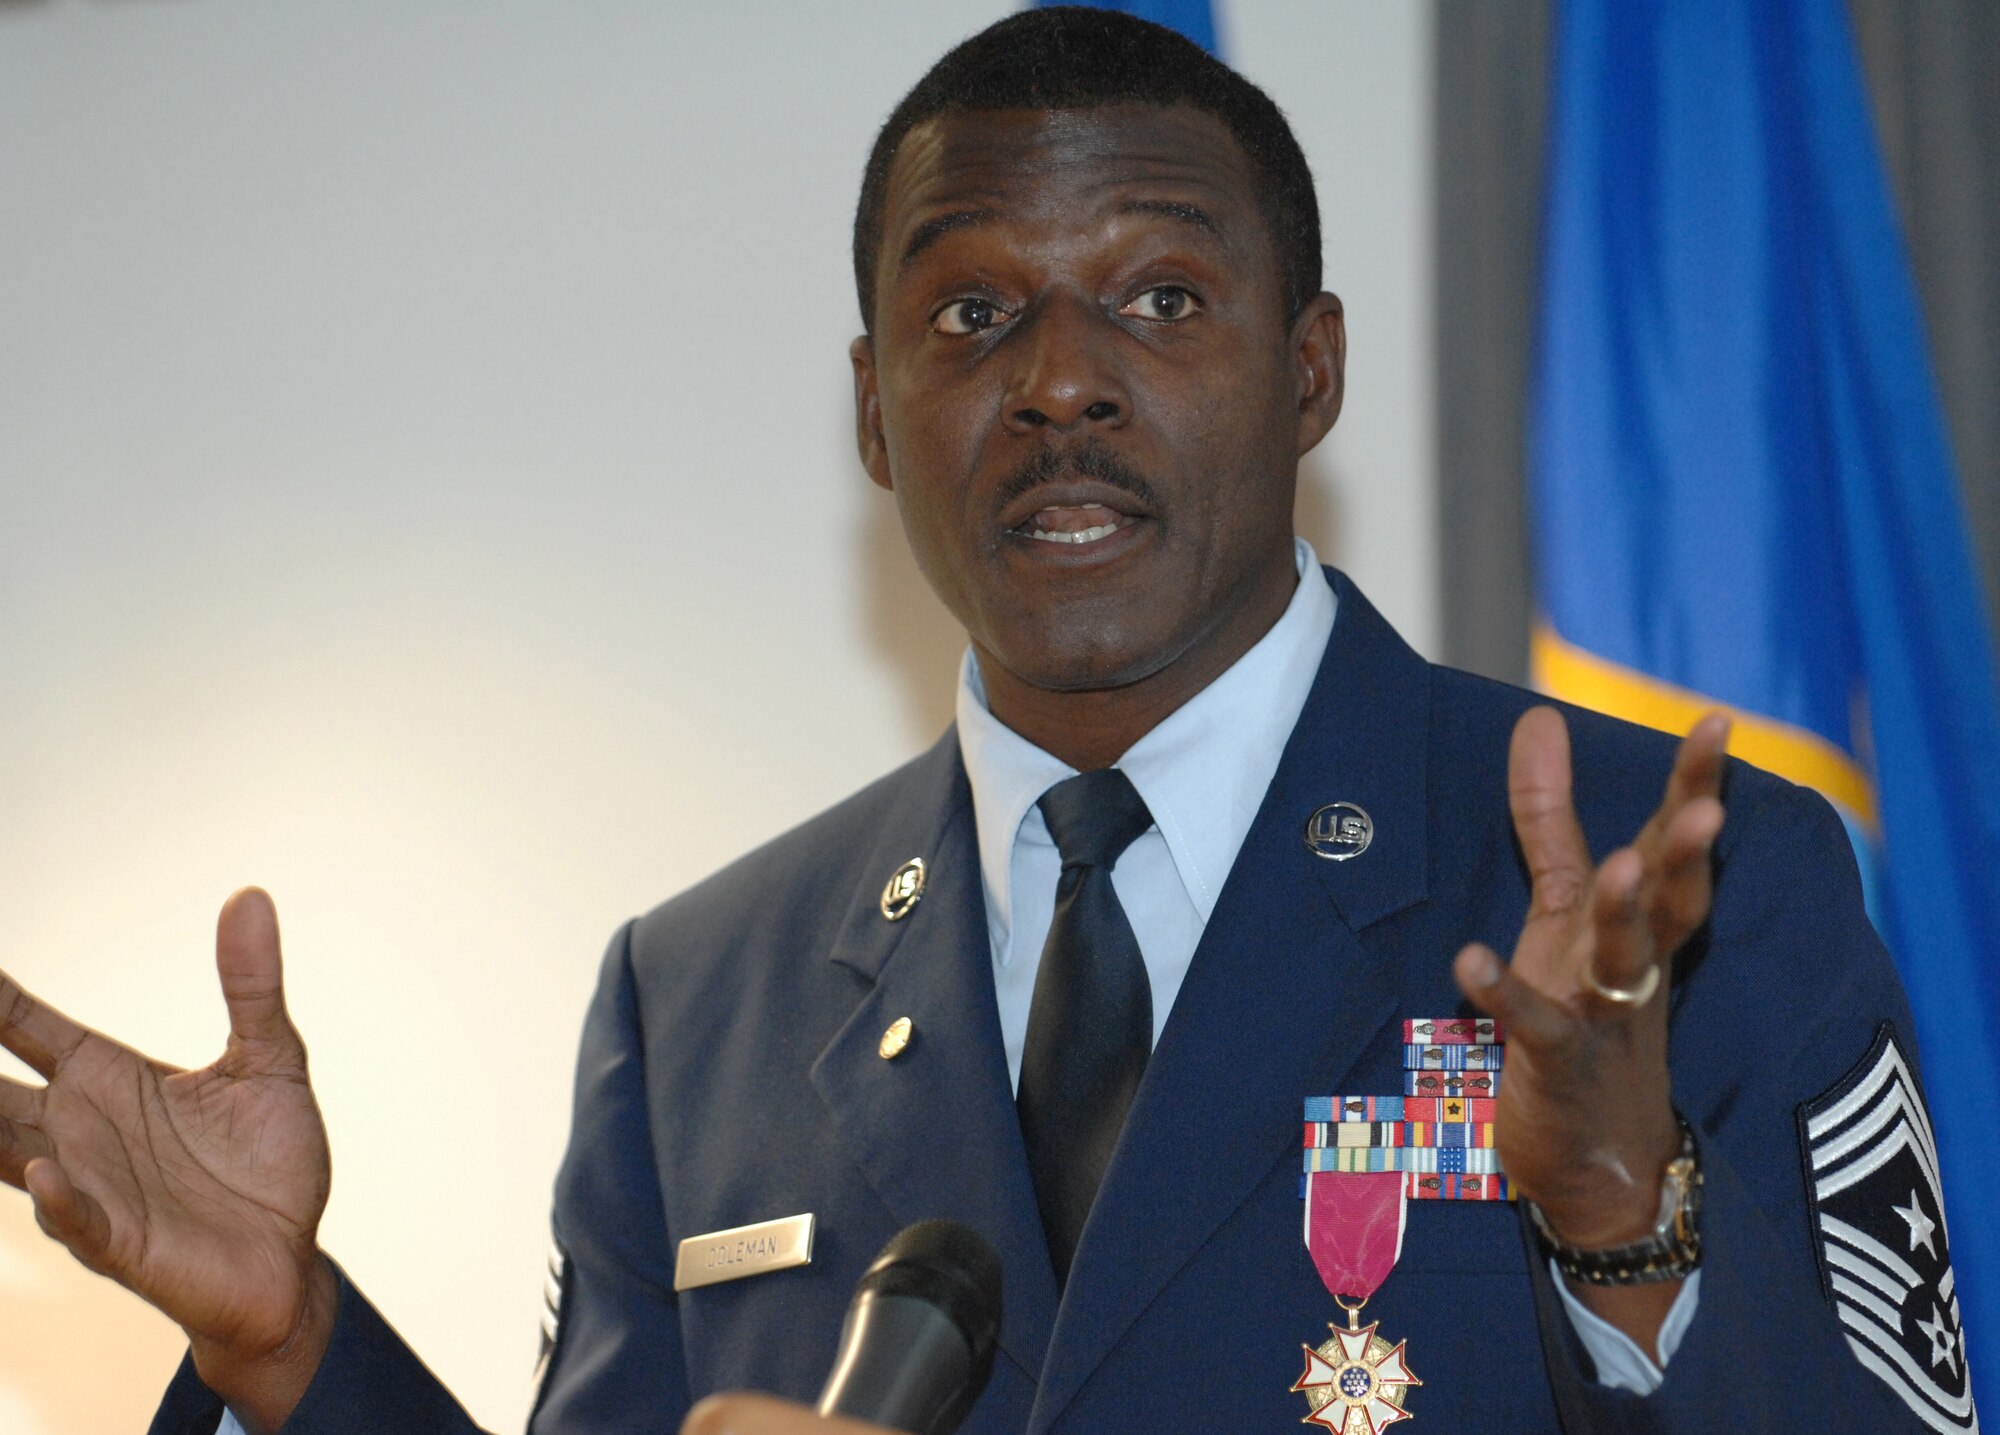 USAFE Command Chief Master Sergeant Gary G. Coleman delivers words of wisdom during his retirement ceremony at the Kisling Non-commissioned Officer Academy auditorium at Kapaun Air Station, Germany honoring his 30 years of military service.  The chief’s retirement is effective May 1, 2008. (U.S. Air Force photo by Tech Sgt. Corey Clements)